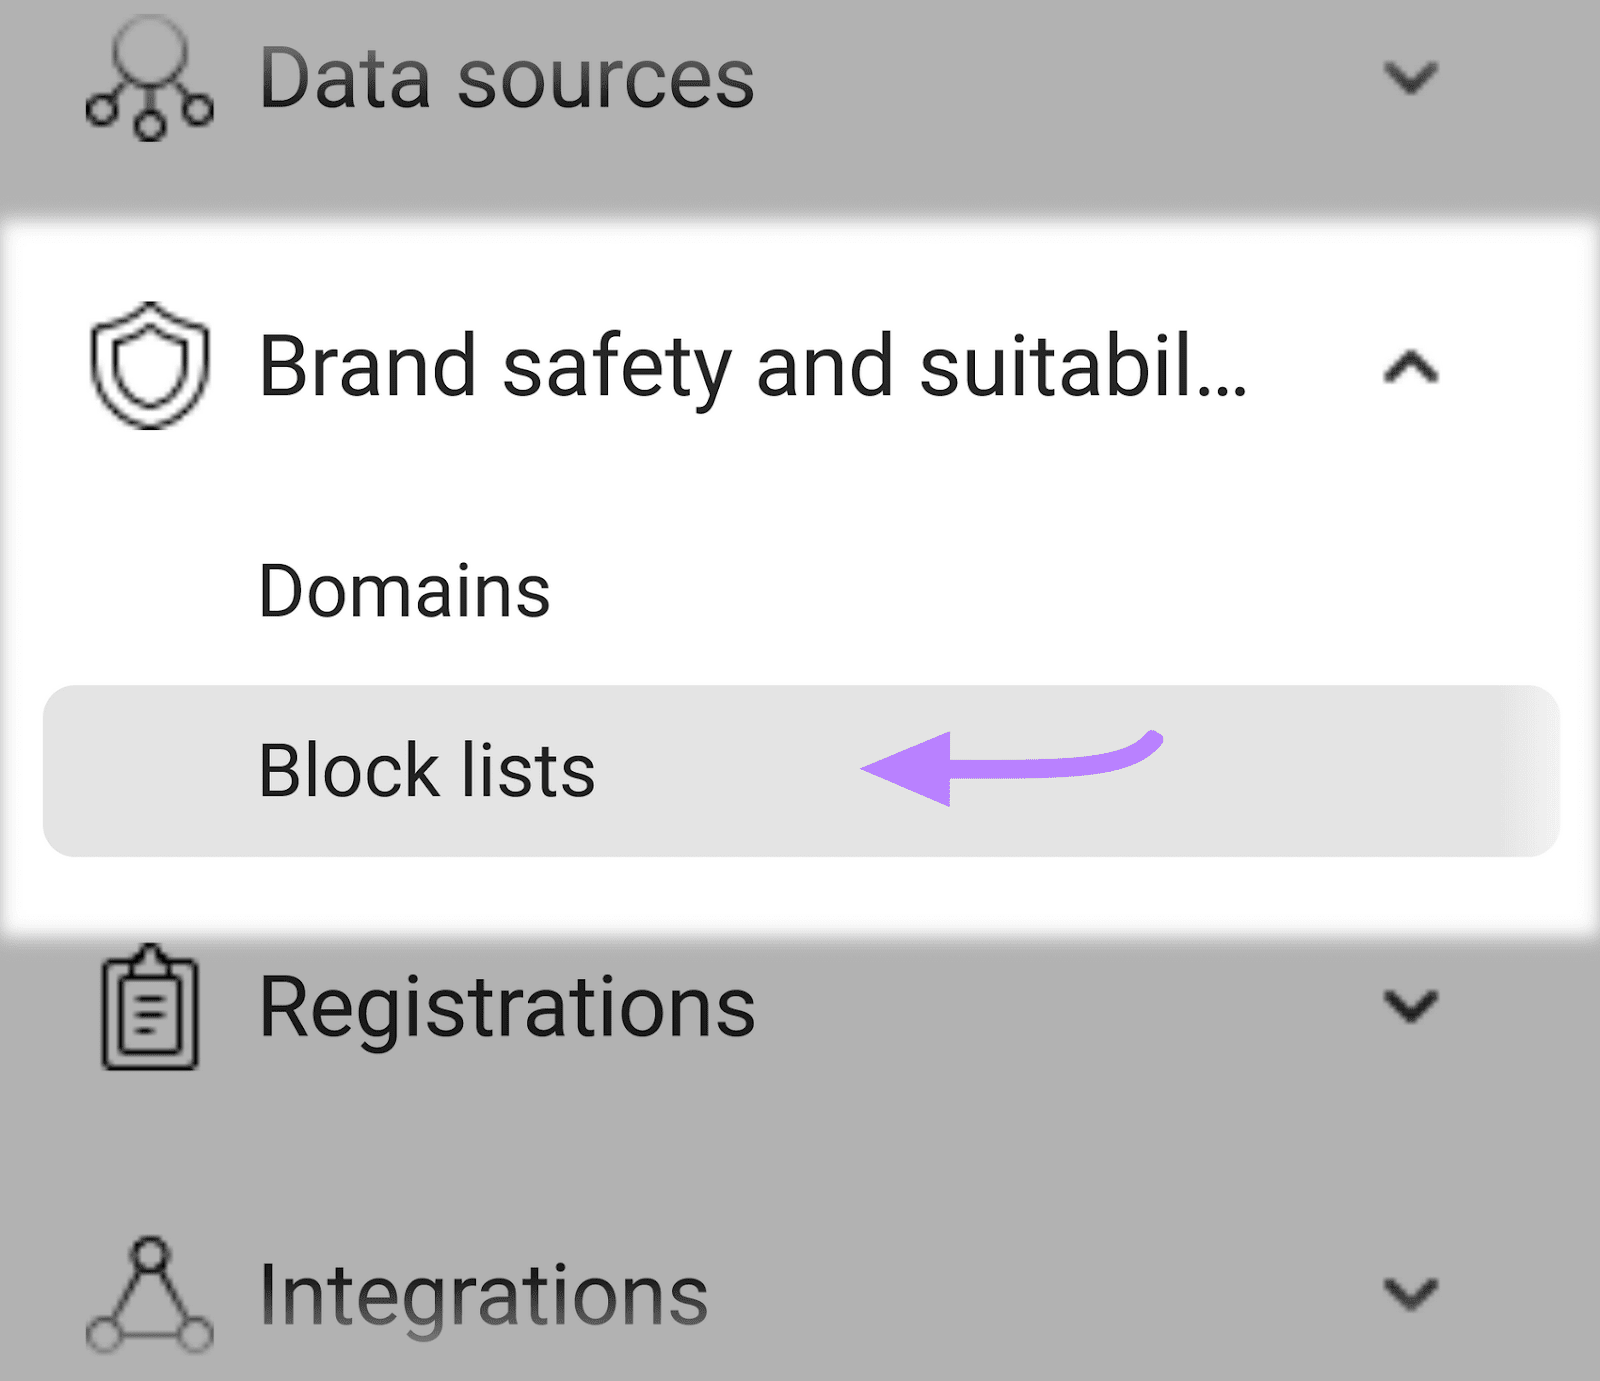 "Block lists" option selected from the “Brand safety and suitability" drop-down menu